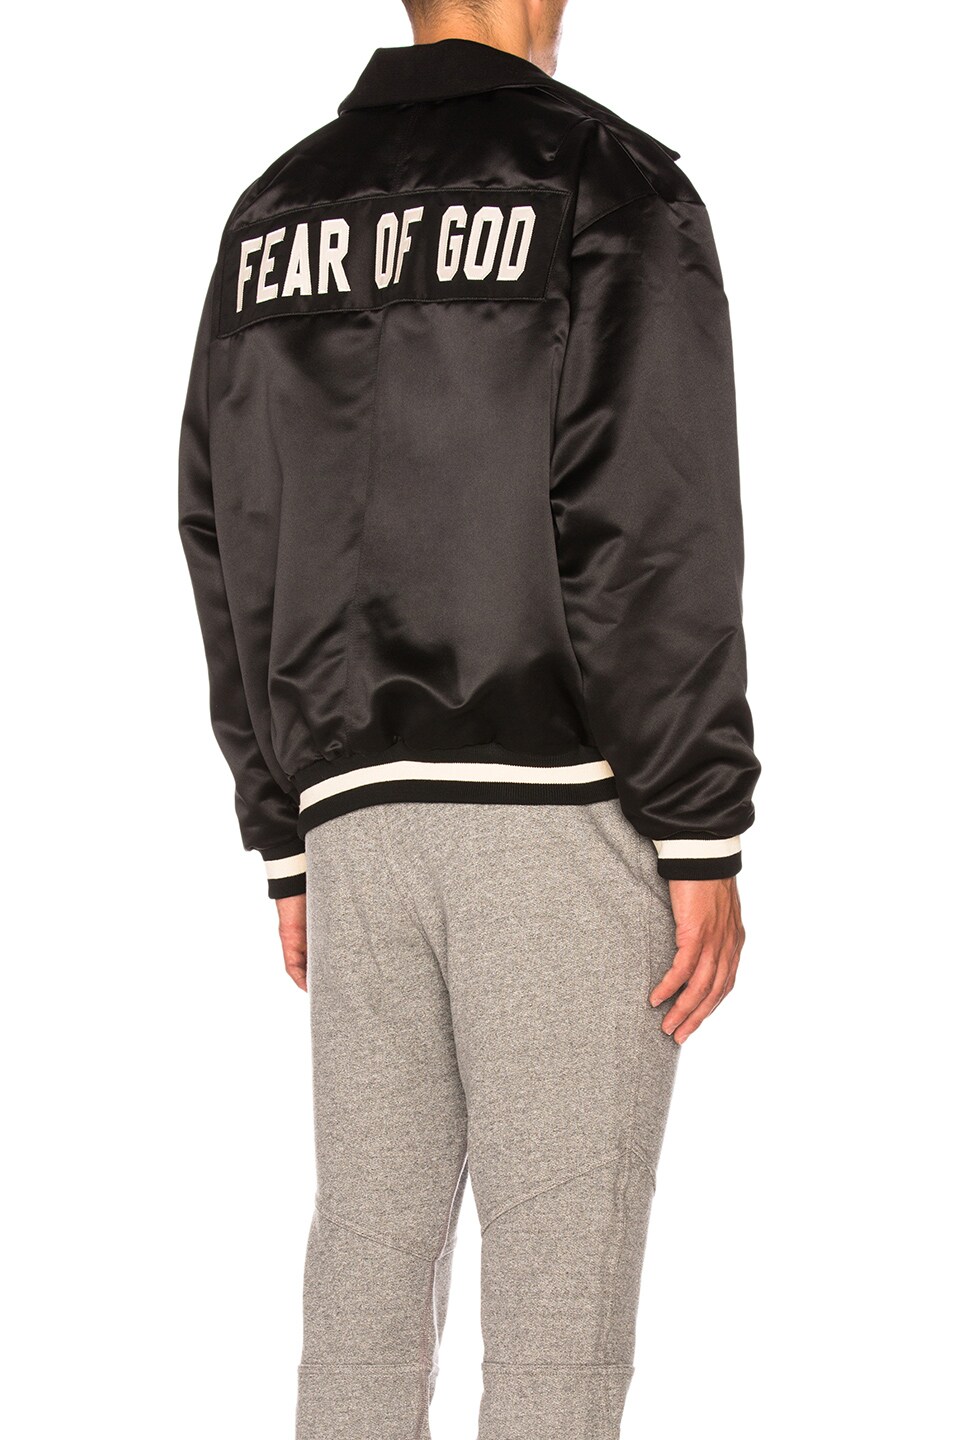 Image 1 of Fear of God Satin Half Zip Coaches Jacket in Black